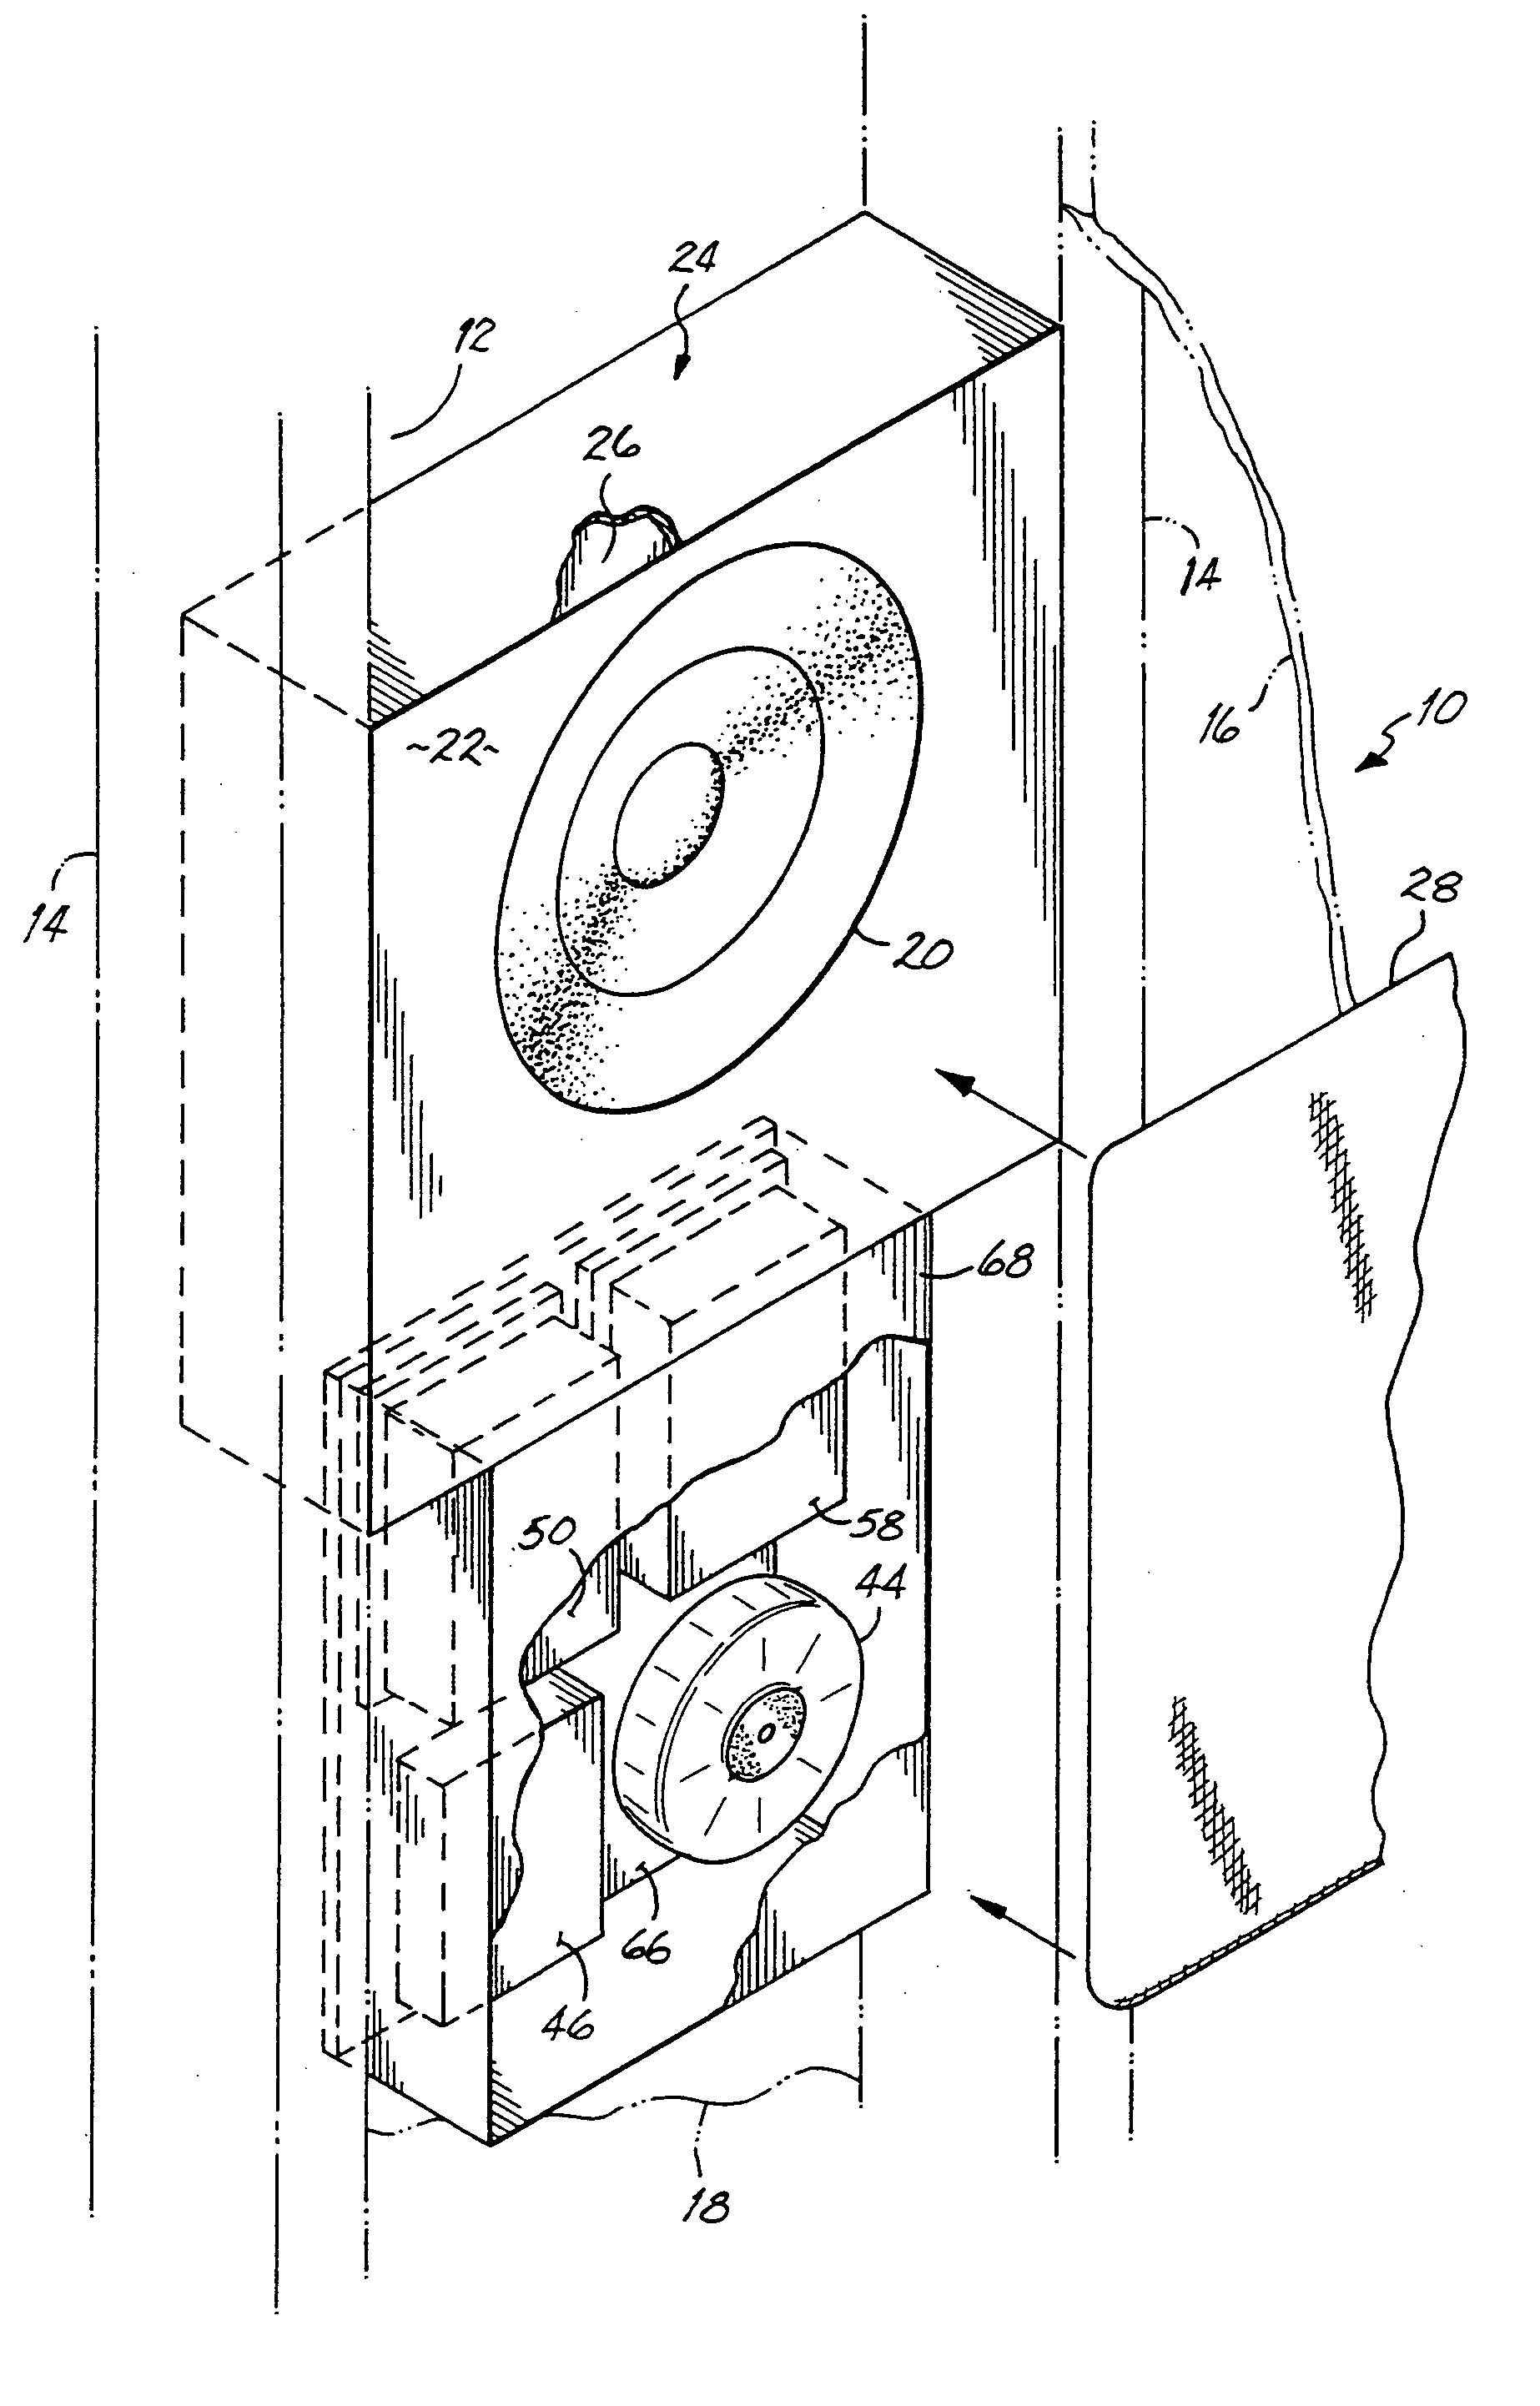 Amplifier and sub-woofer speaker system